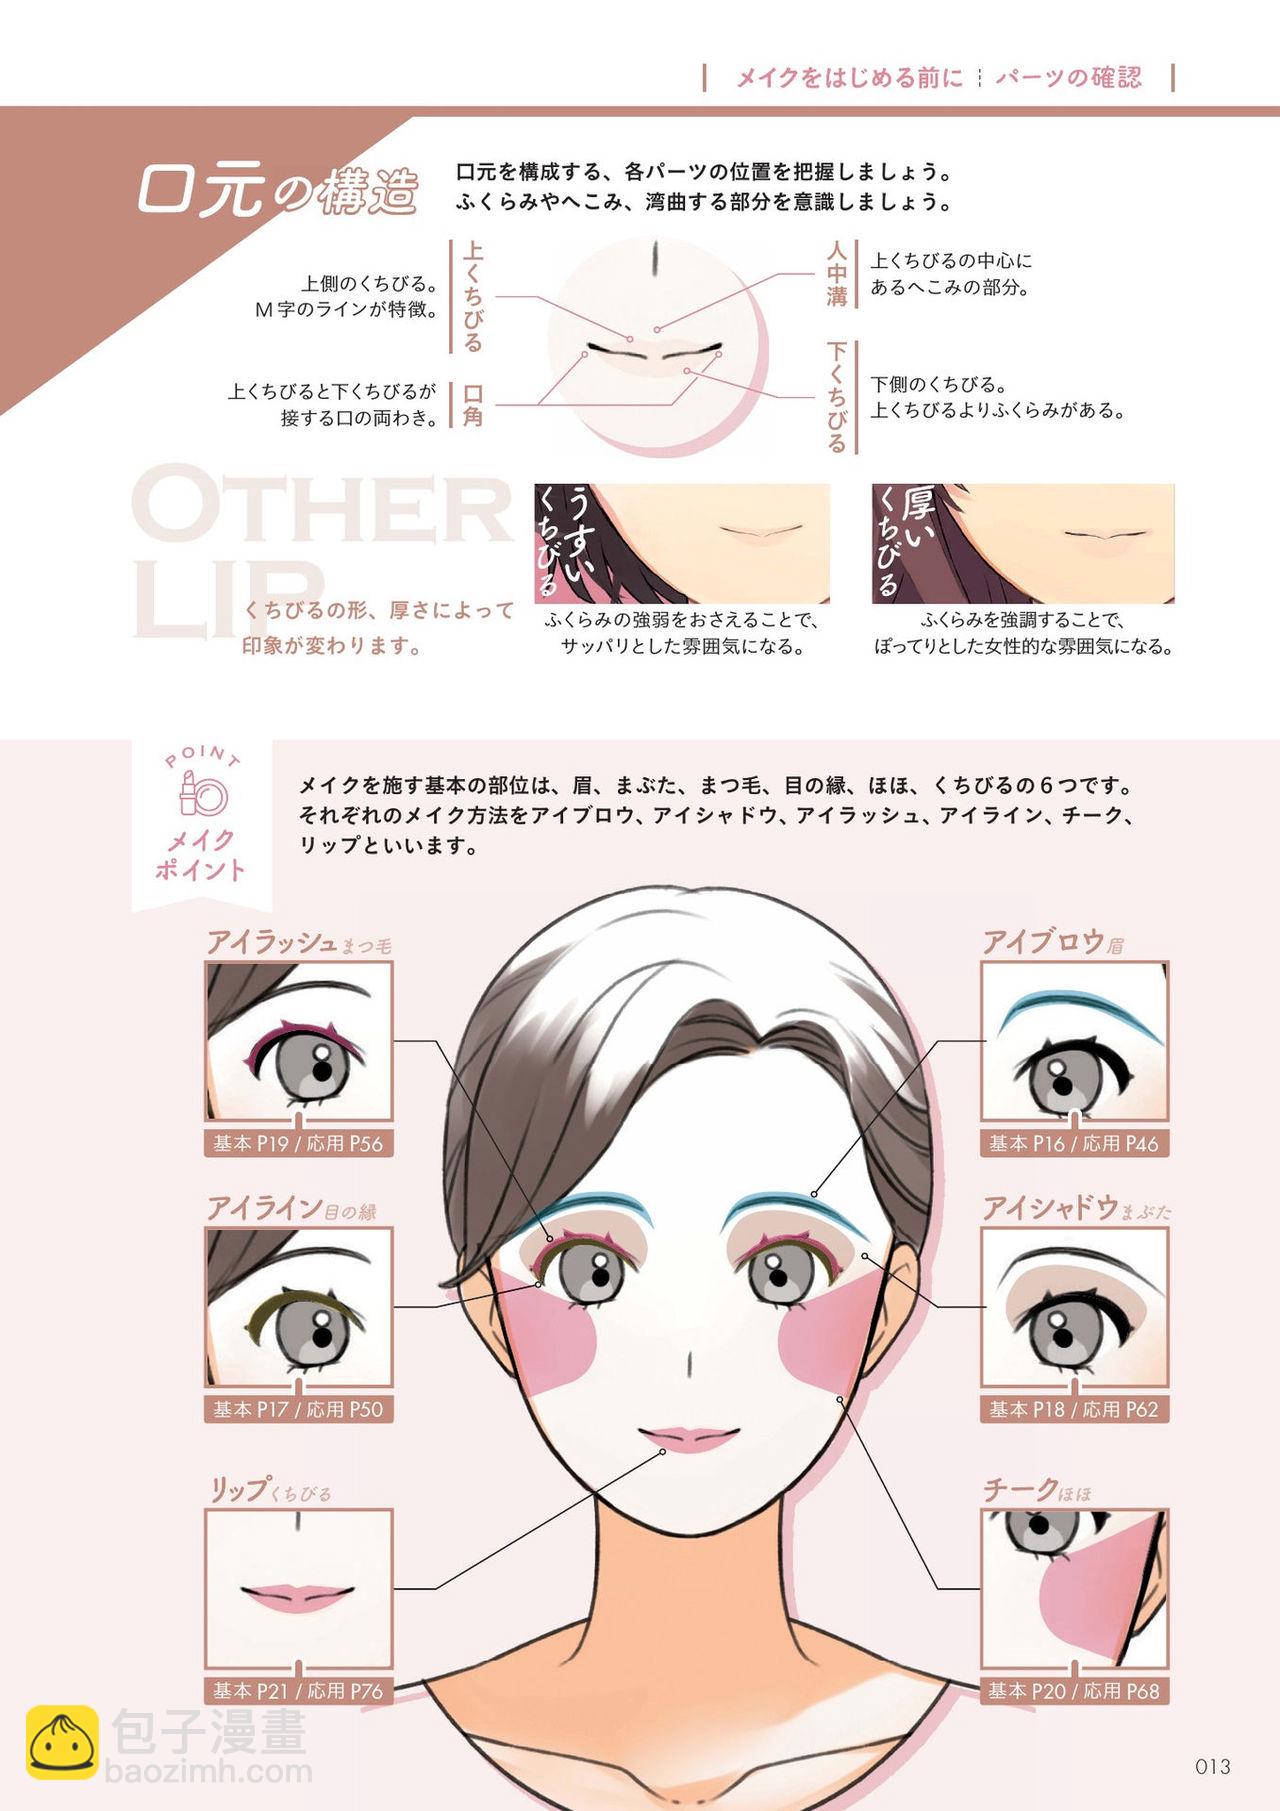 [sogawa]Super drawable series Techniques for drawing female characters with makeup  - 1話(1/4) - 7